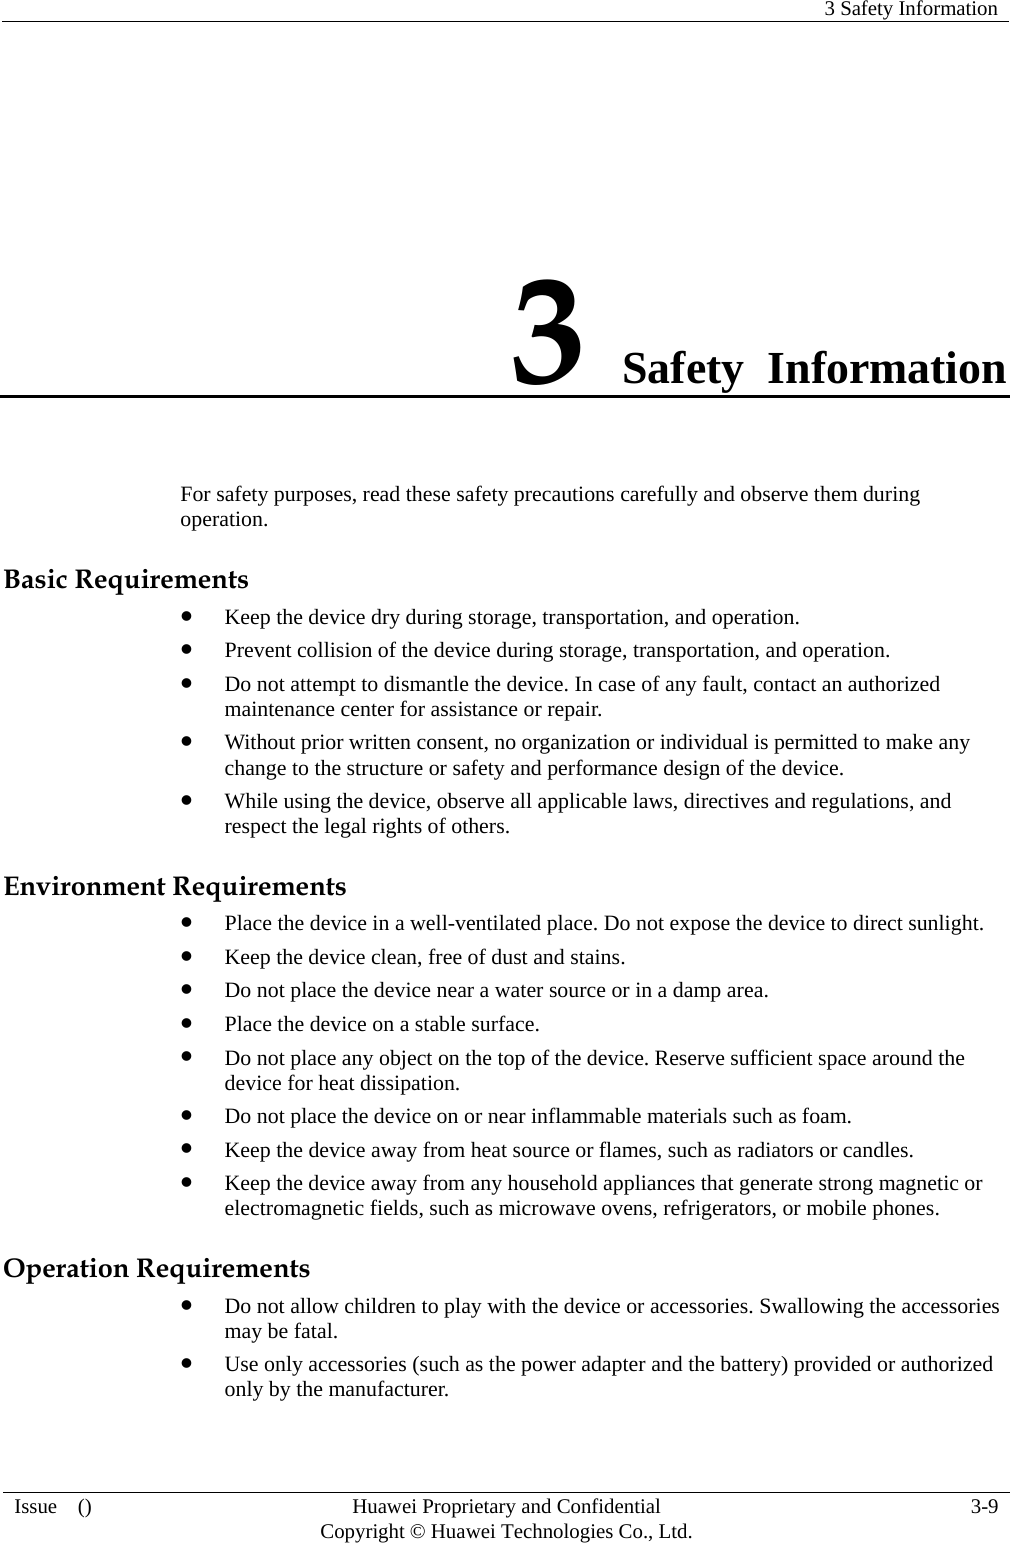   3 Safety Information  Issue  ()  Huawei Proprietary and Confidential     Copyright © Huawei Technologies Co., Ltd. 3-9  3 Safety Information For safety purposes, read these safety precautions carefully and observe them during operation. Basic Requirements  Keep the device dry during storage, transportation, and operation.  Prevent collision of the device during storage, transportation, and operation.  Do not attempt to dismantle the device. In case of any fault, contact an authorized maintenance center for assistance or repair.  Without prior written consent, no organization or individual is permitted to make any change to the structure or safety and performance design of the device.  While using the device, observe all applicable laws, directives and regulations, and respect the legal rights of others. Environment Requirements  Place the device in a well-ventilated place. Do not expose the device to direct sunlight.  Keep the device clean, free of dust and stains.  Do not place the device near a water source or in a damp area.  Place the device on a stable surface.  Do not place any object on the top of the device. Reserve sufficient space around the device for heat dissipation.  Do not place the device on or near inflammable materials such as foam.  Keep the device away from heat source or flames, such as radiators or candles.  Keep the device away from any household appliances that generate strong magnetic or electromagnetic fields, such as microwave ovens, refrigerators, or mobile phones. Operation Requirements  Do not allow children to play with the device or accessories. Swallowing the accessories may be fatal.  Use only accessories (such as the power adapter and the battery) provided or authorized only by the manufacturer. 